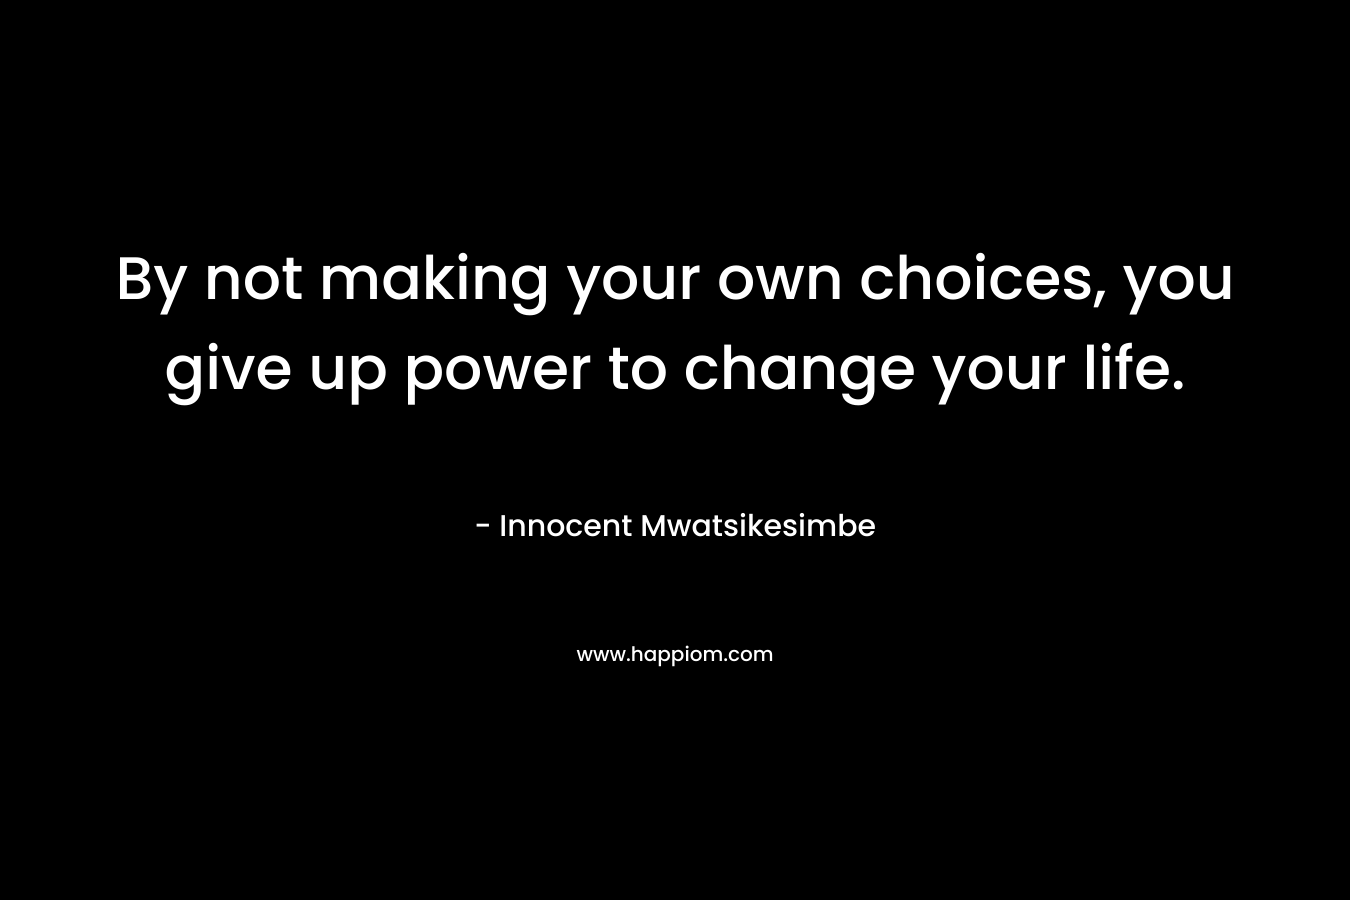 By not making your own choices, you give up power to change your life.